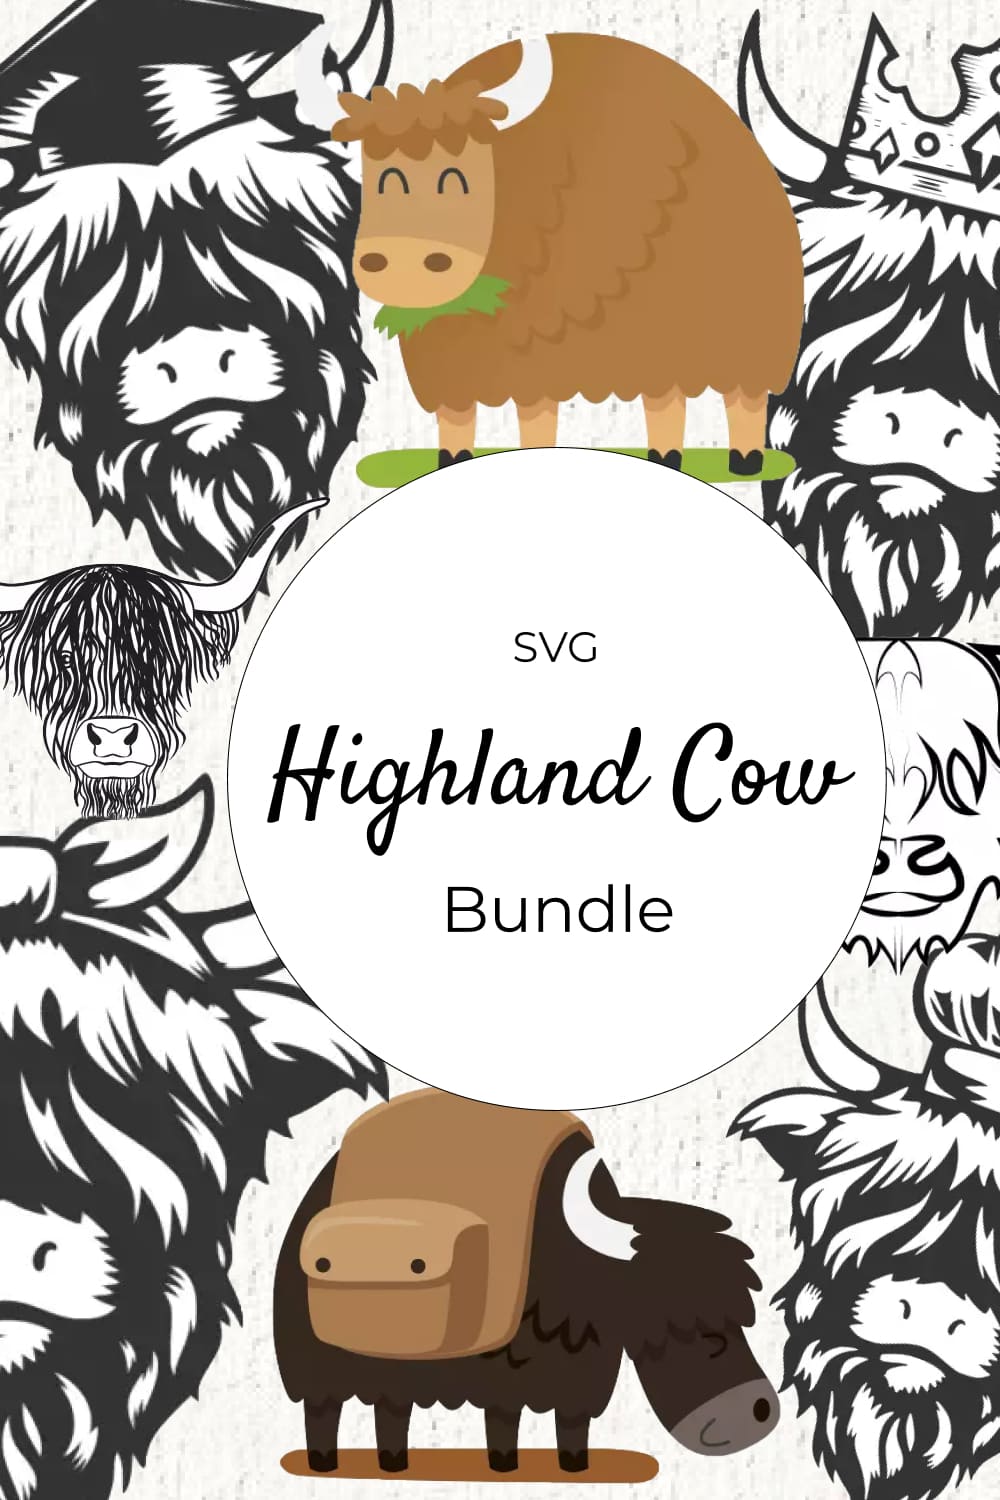 The highland cow bundle includes an image of a bison.